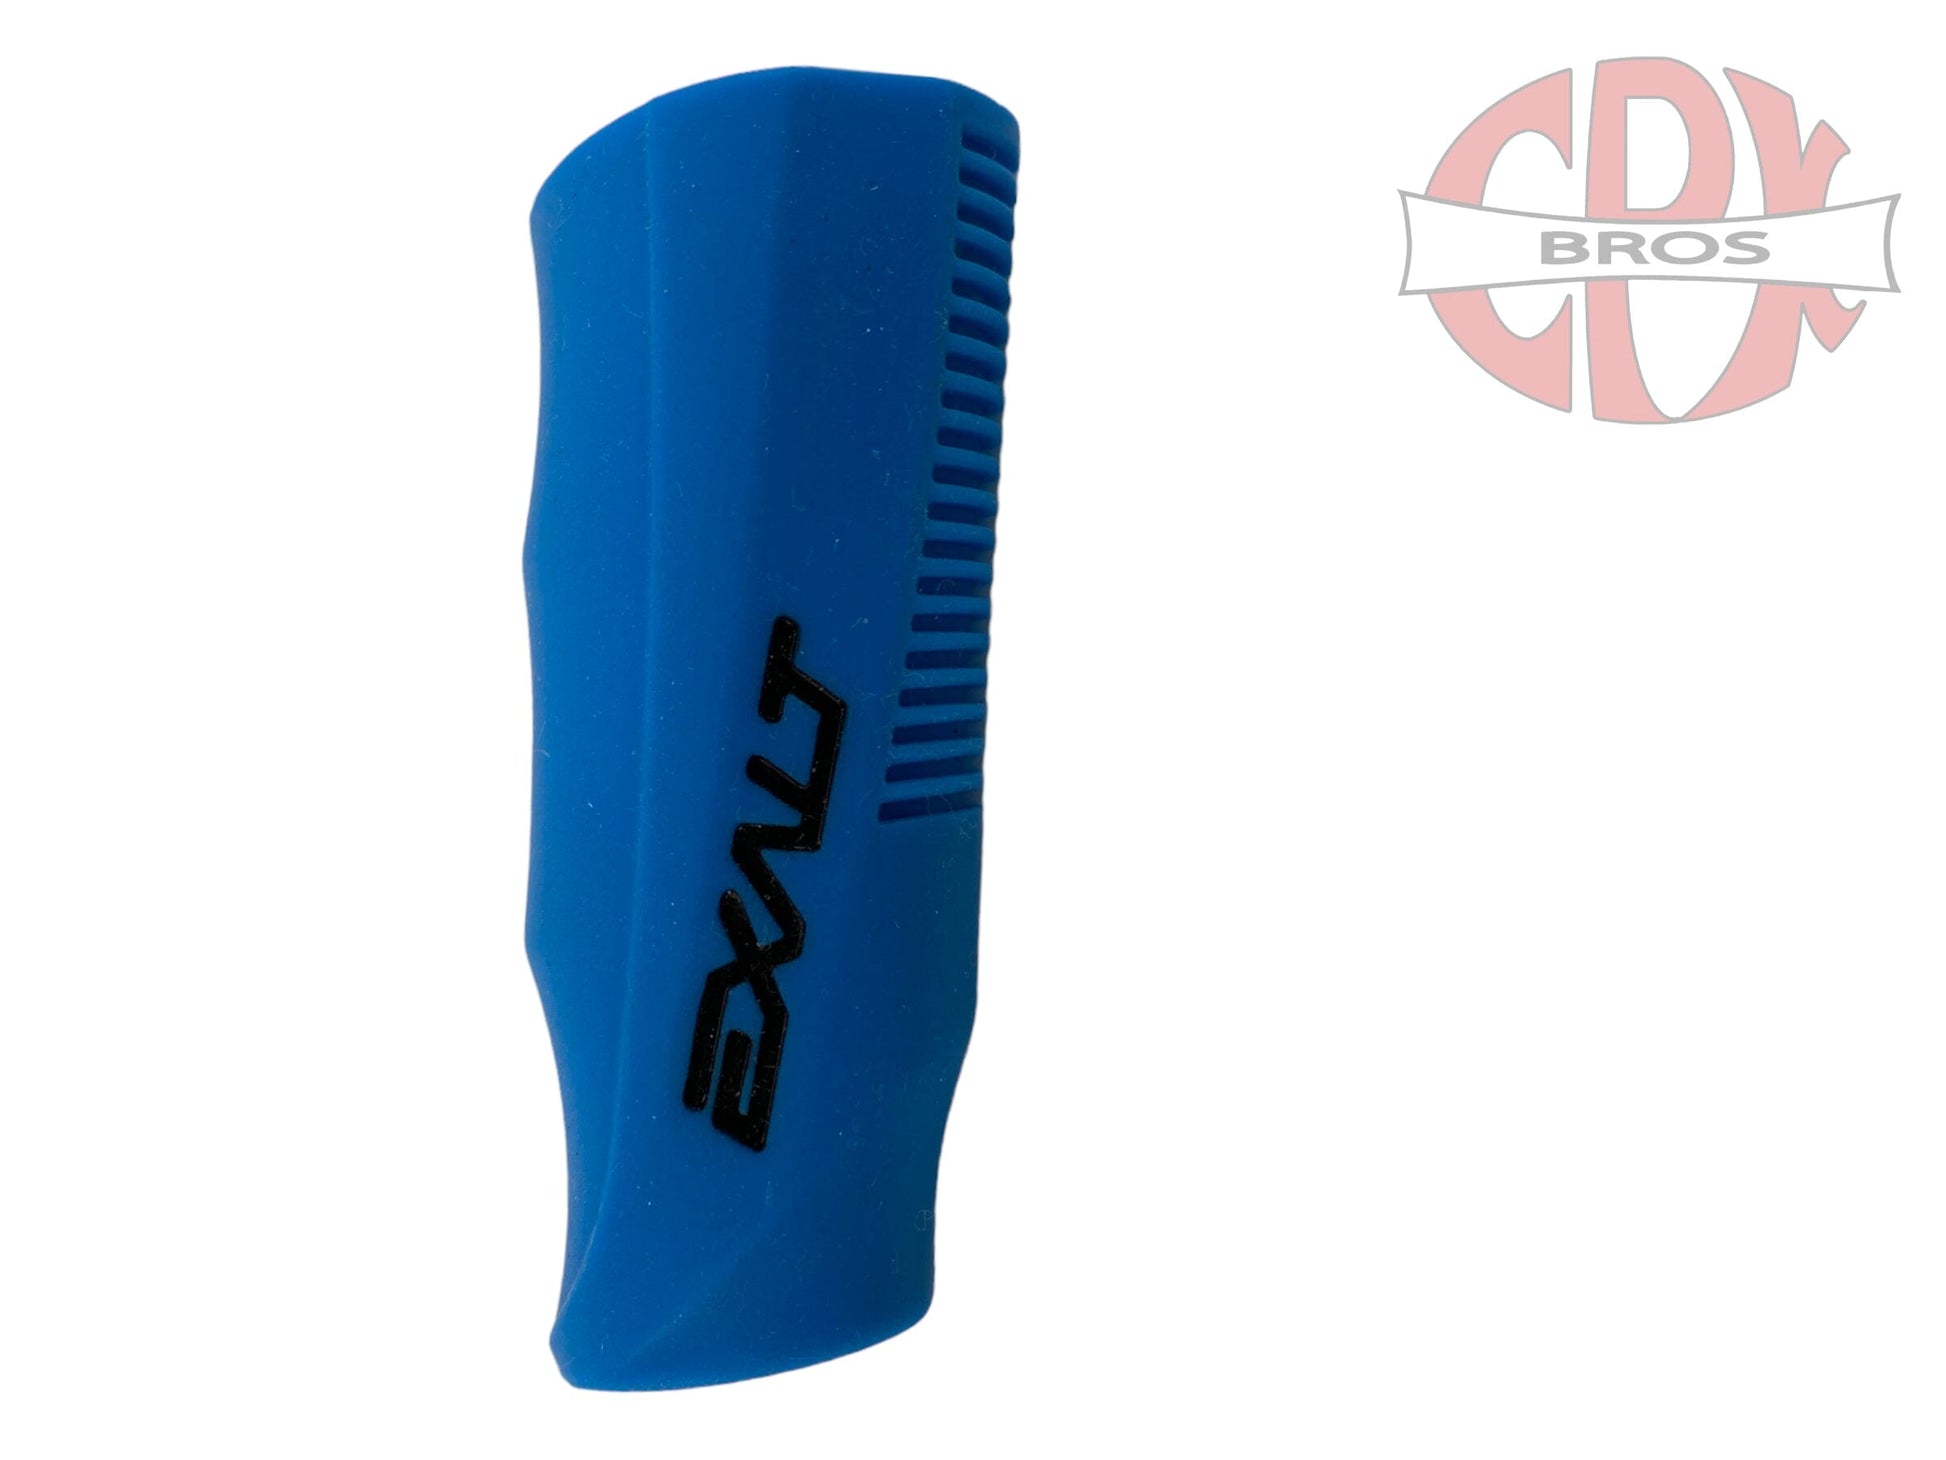 Used Exalt Luxe Paintball Marker Regulator Rubber Protective Grip Cover Cyan Blue Paintball Gun from CPXBrosPaintball Buy/Sell/Trade Paintball Markers, Paintball Hoppers, Paintball Masks, and Hormesis Headbands